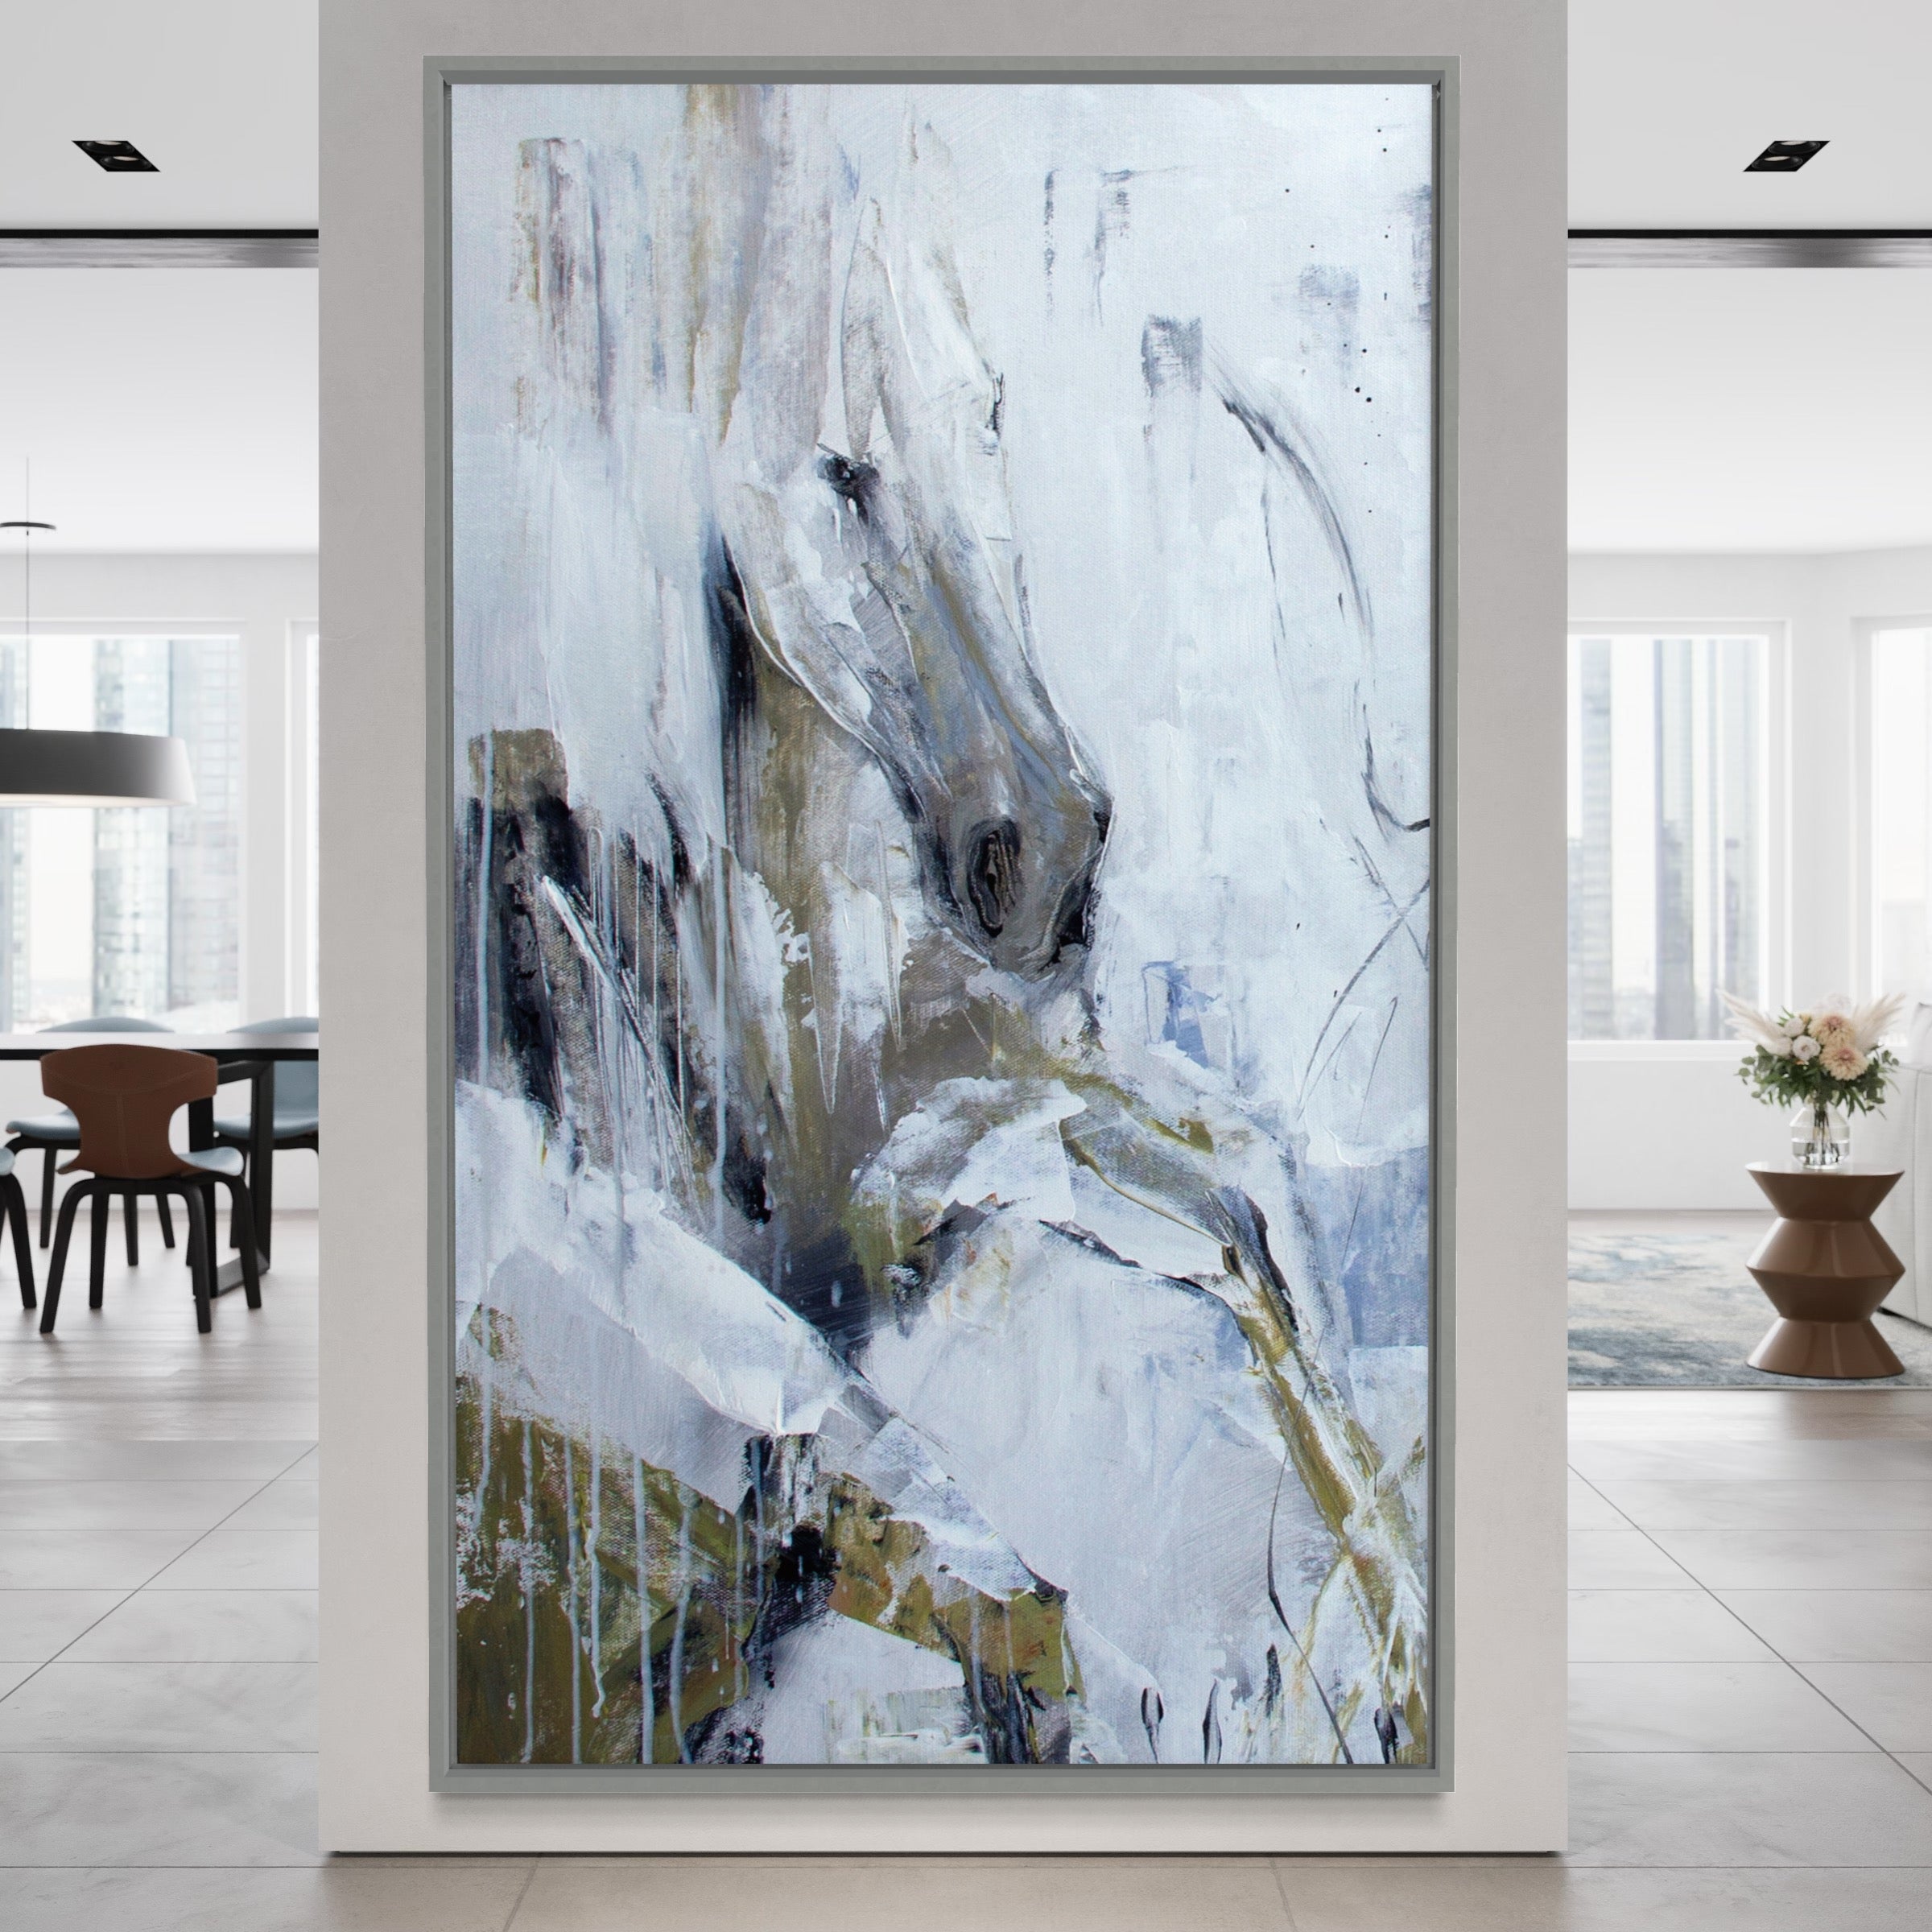 Celestial Abstractions, Gallery Wrap (With Bleed) / 168x280cm